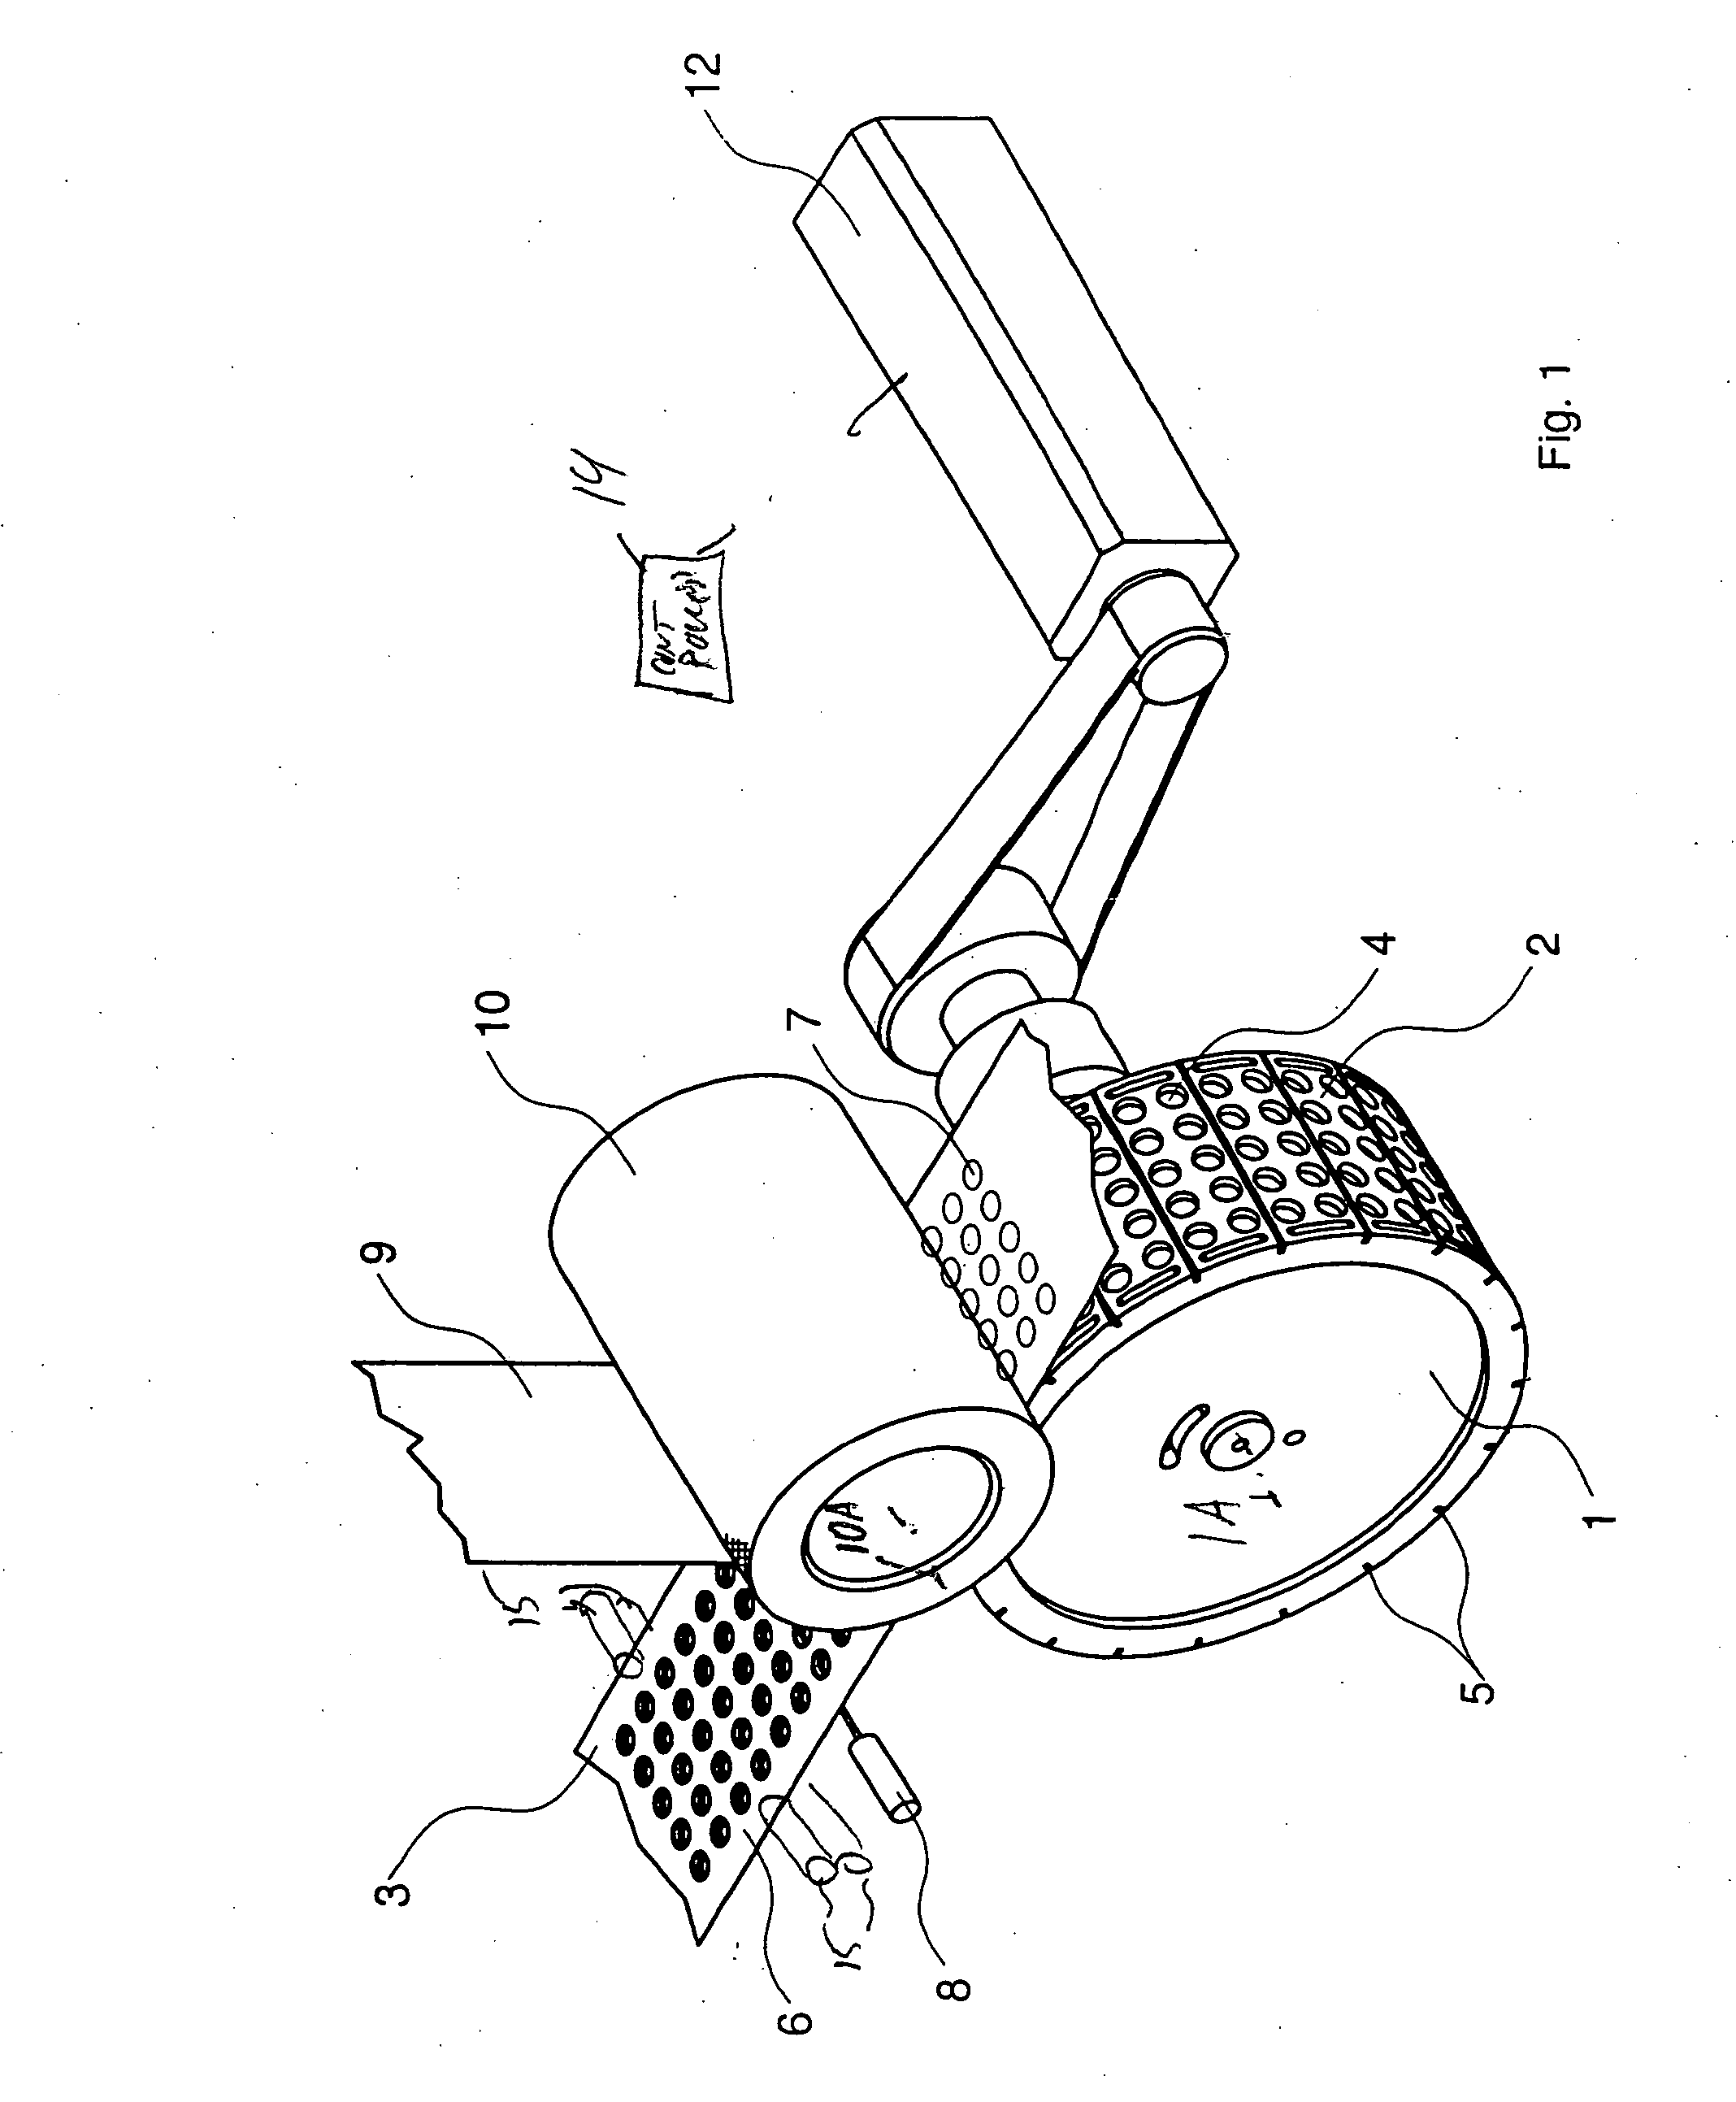 Apparatus for sealing a cover foil to a blister foil